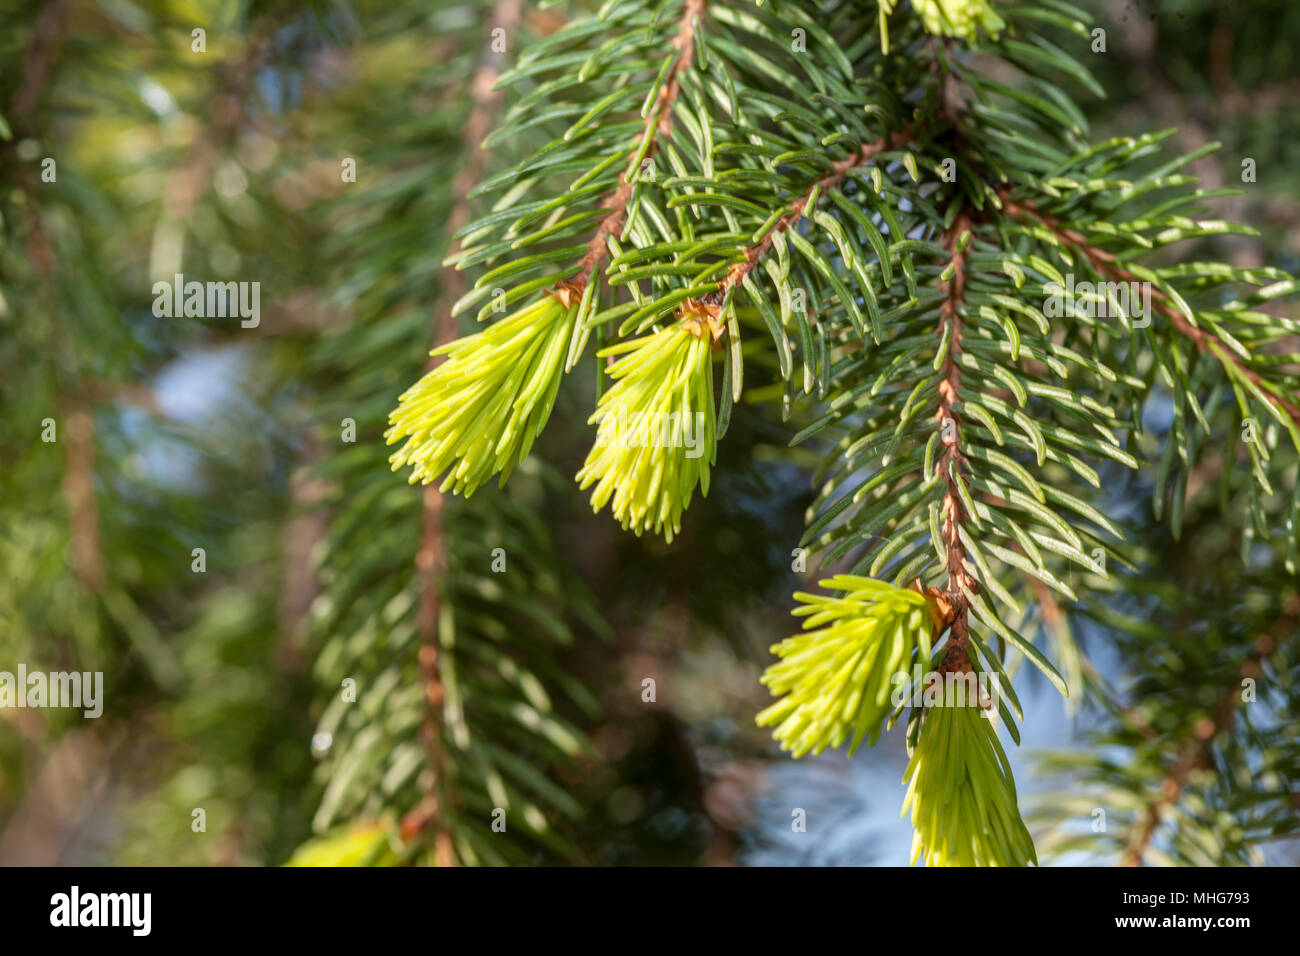 Norway Spruce, Gran (Picea abies) Stock Photo